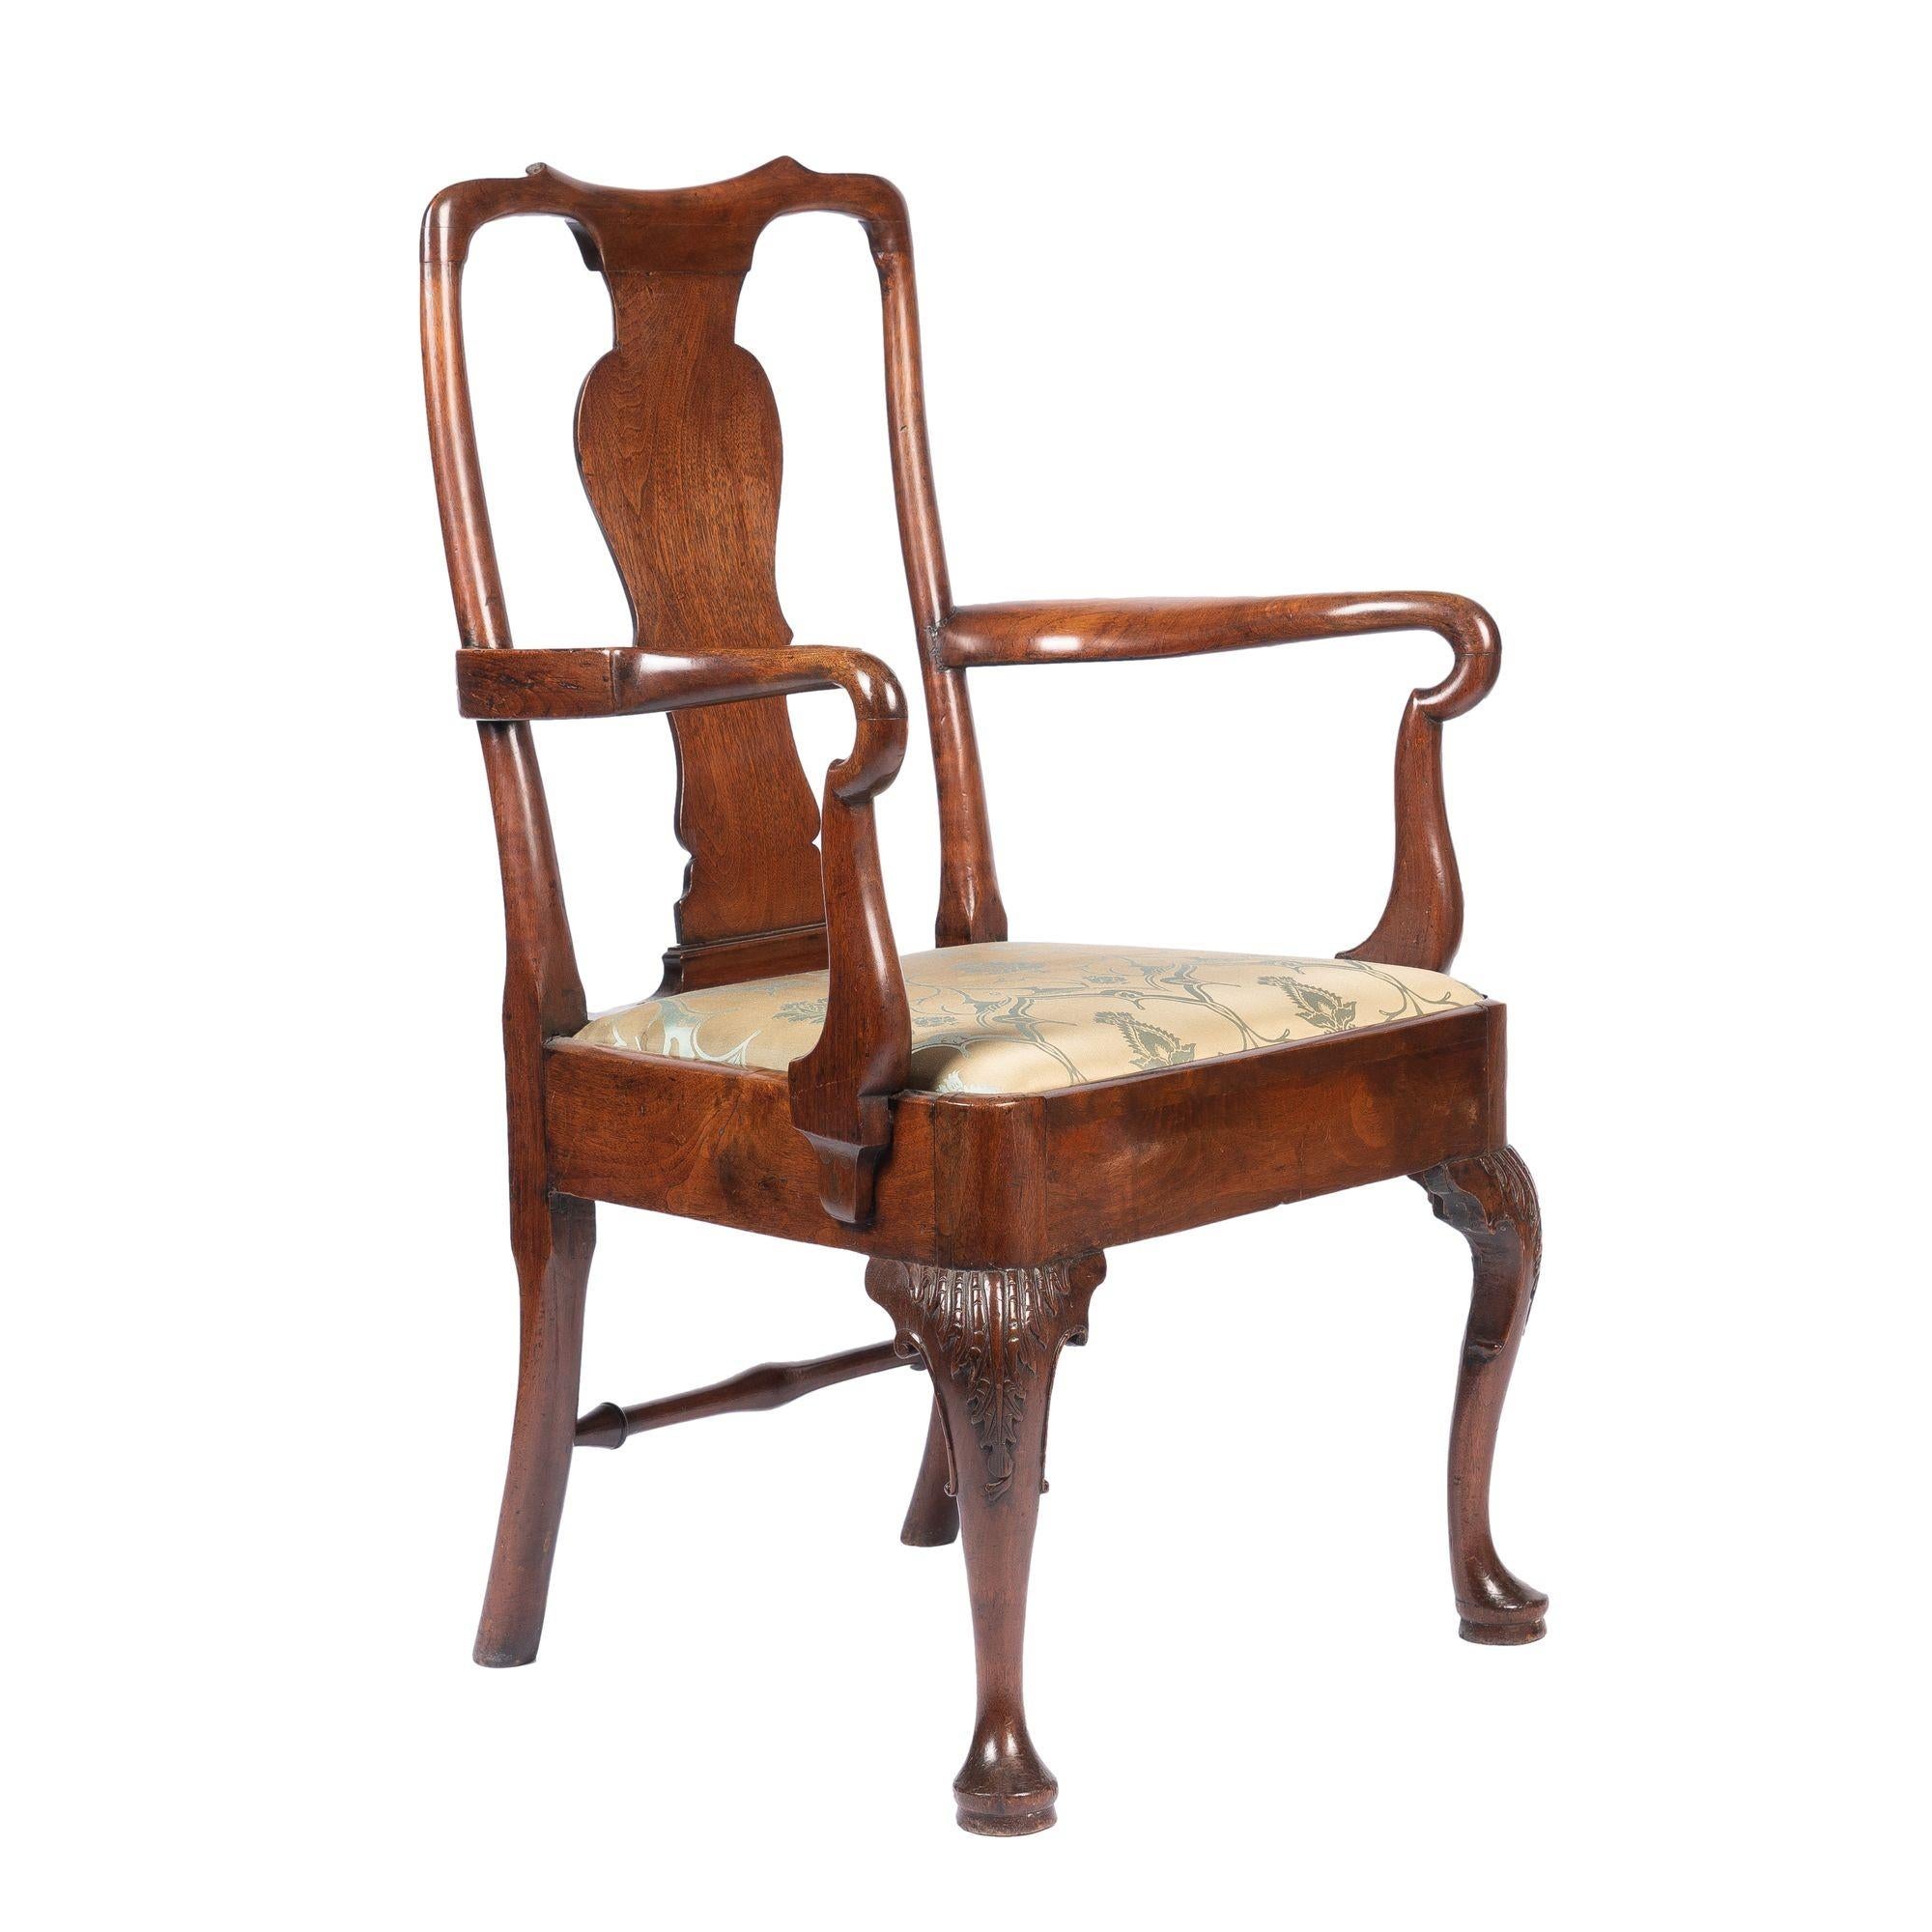 English Georgian Mahogany Armchair with Upholstered Slip Seat, c. 1720 For Sale 2